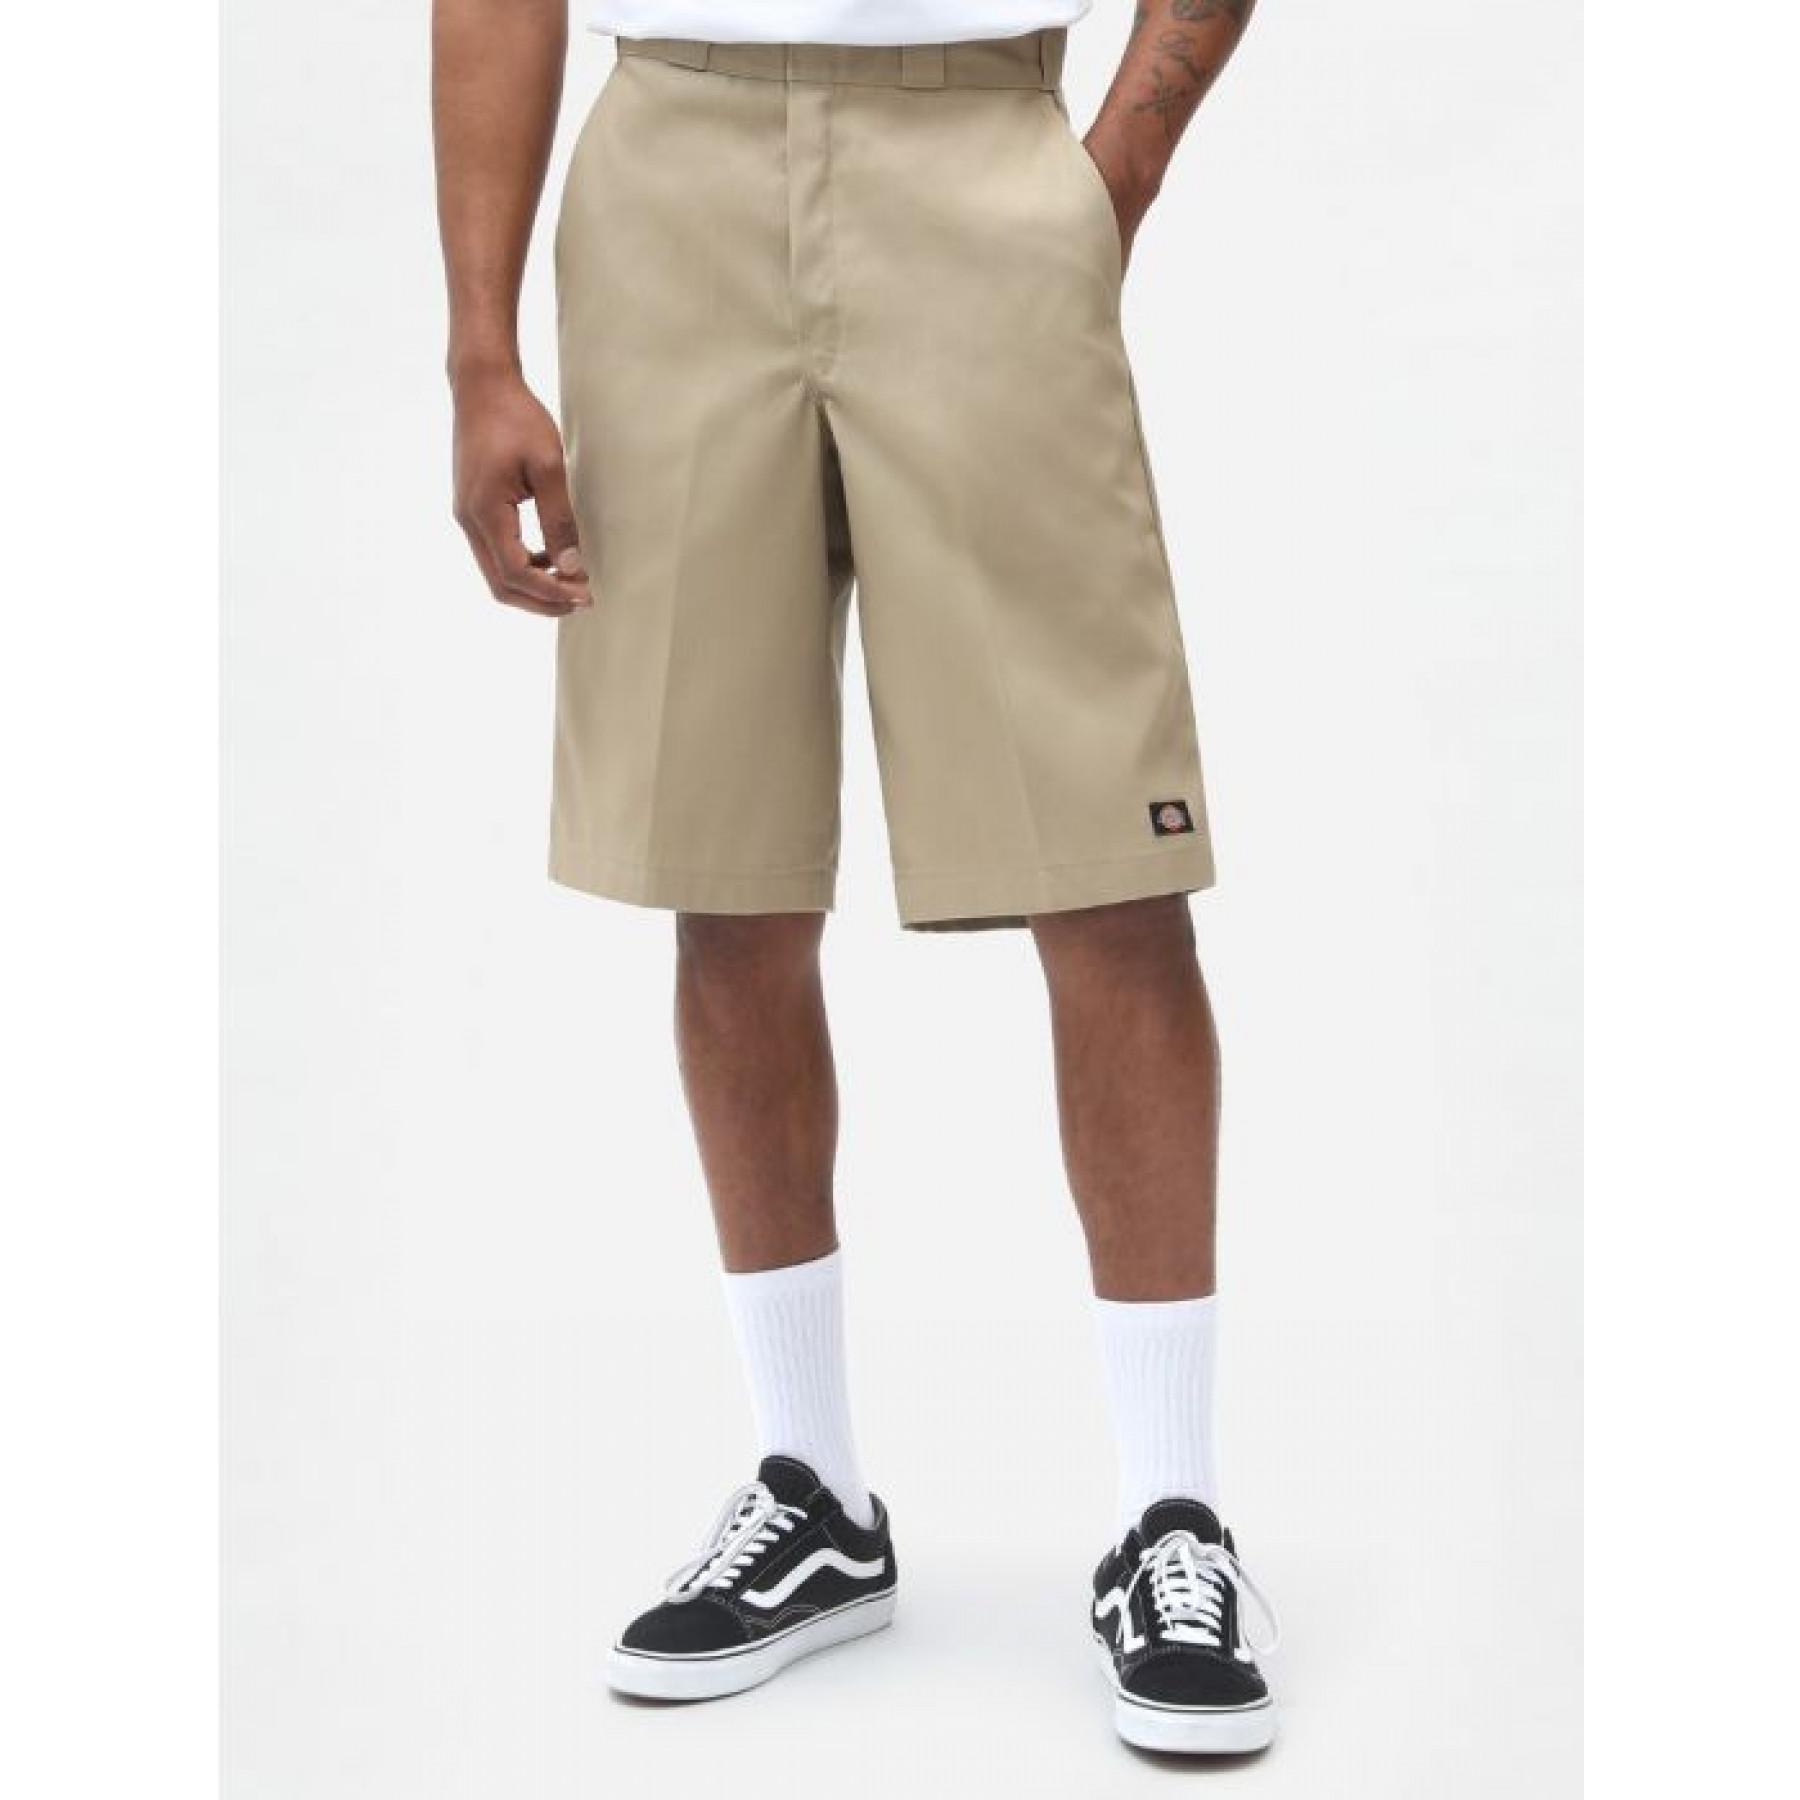 Arbeitsshorts Dickies multipoches